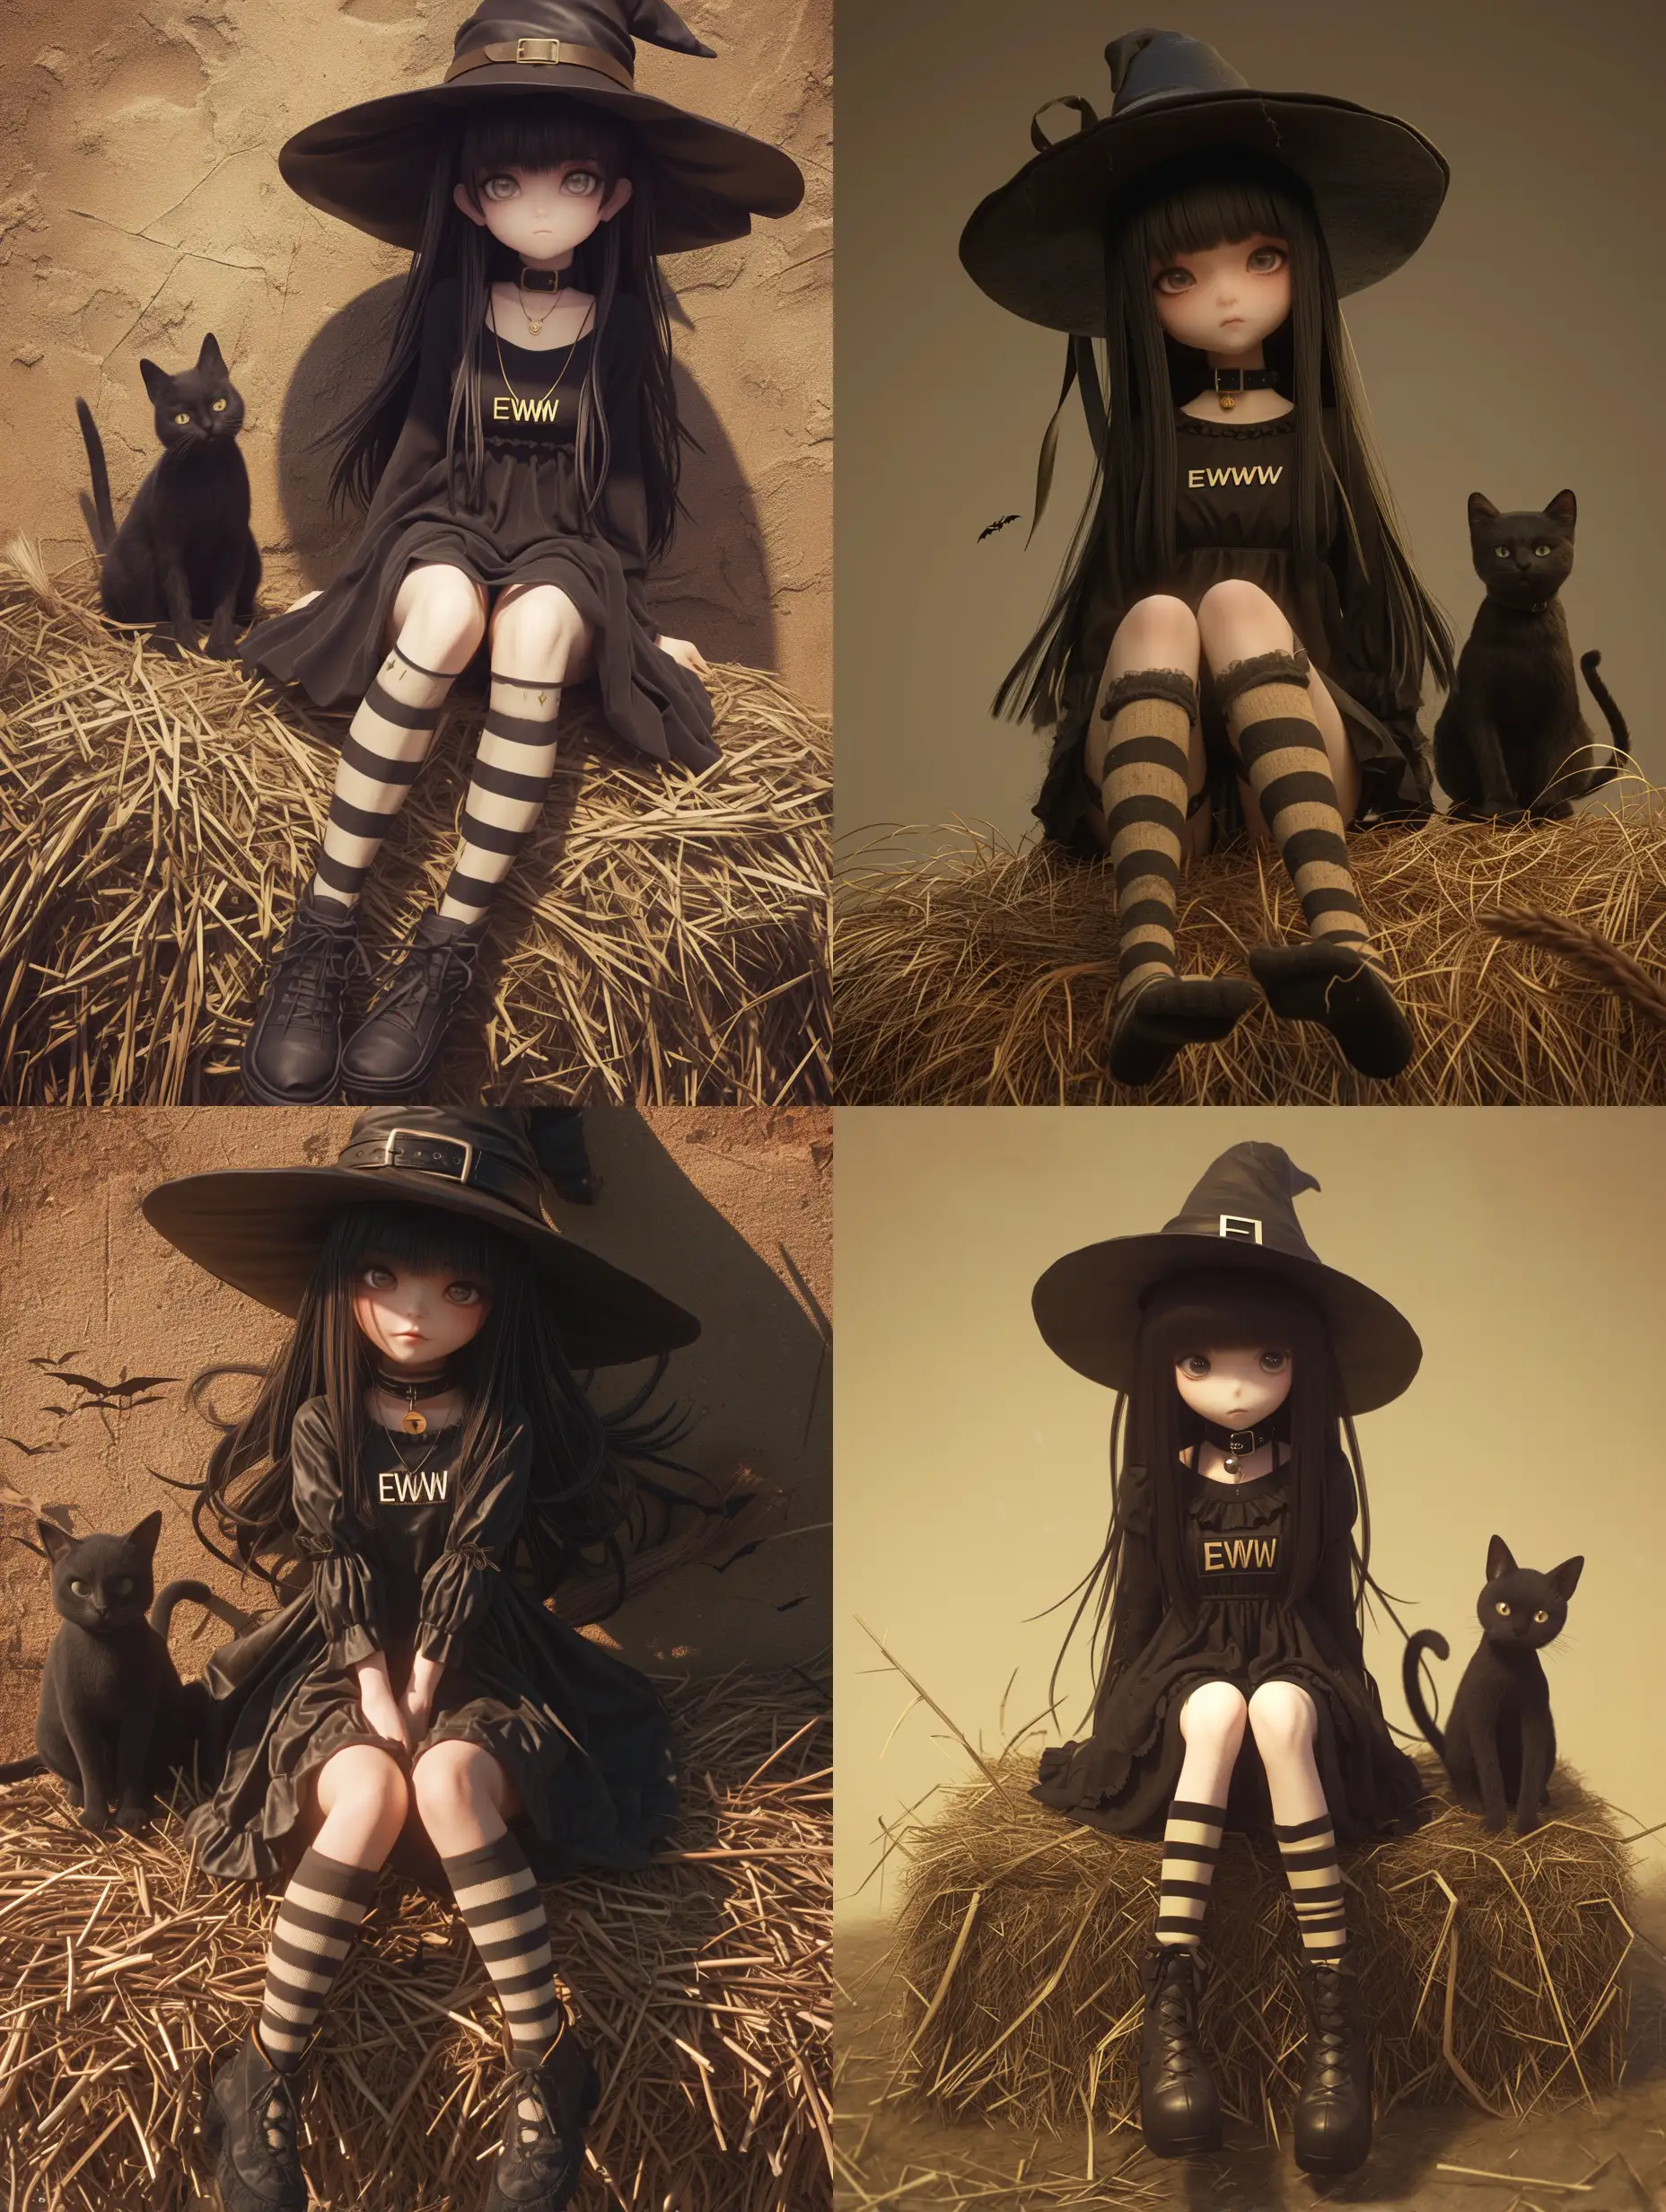 Cute-Anime-Girl-with-Black-Cat-Witchy-Haystack-Scene